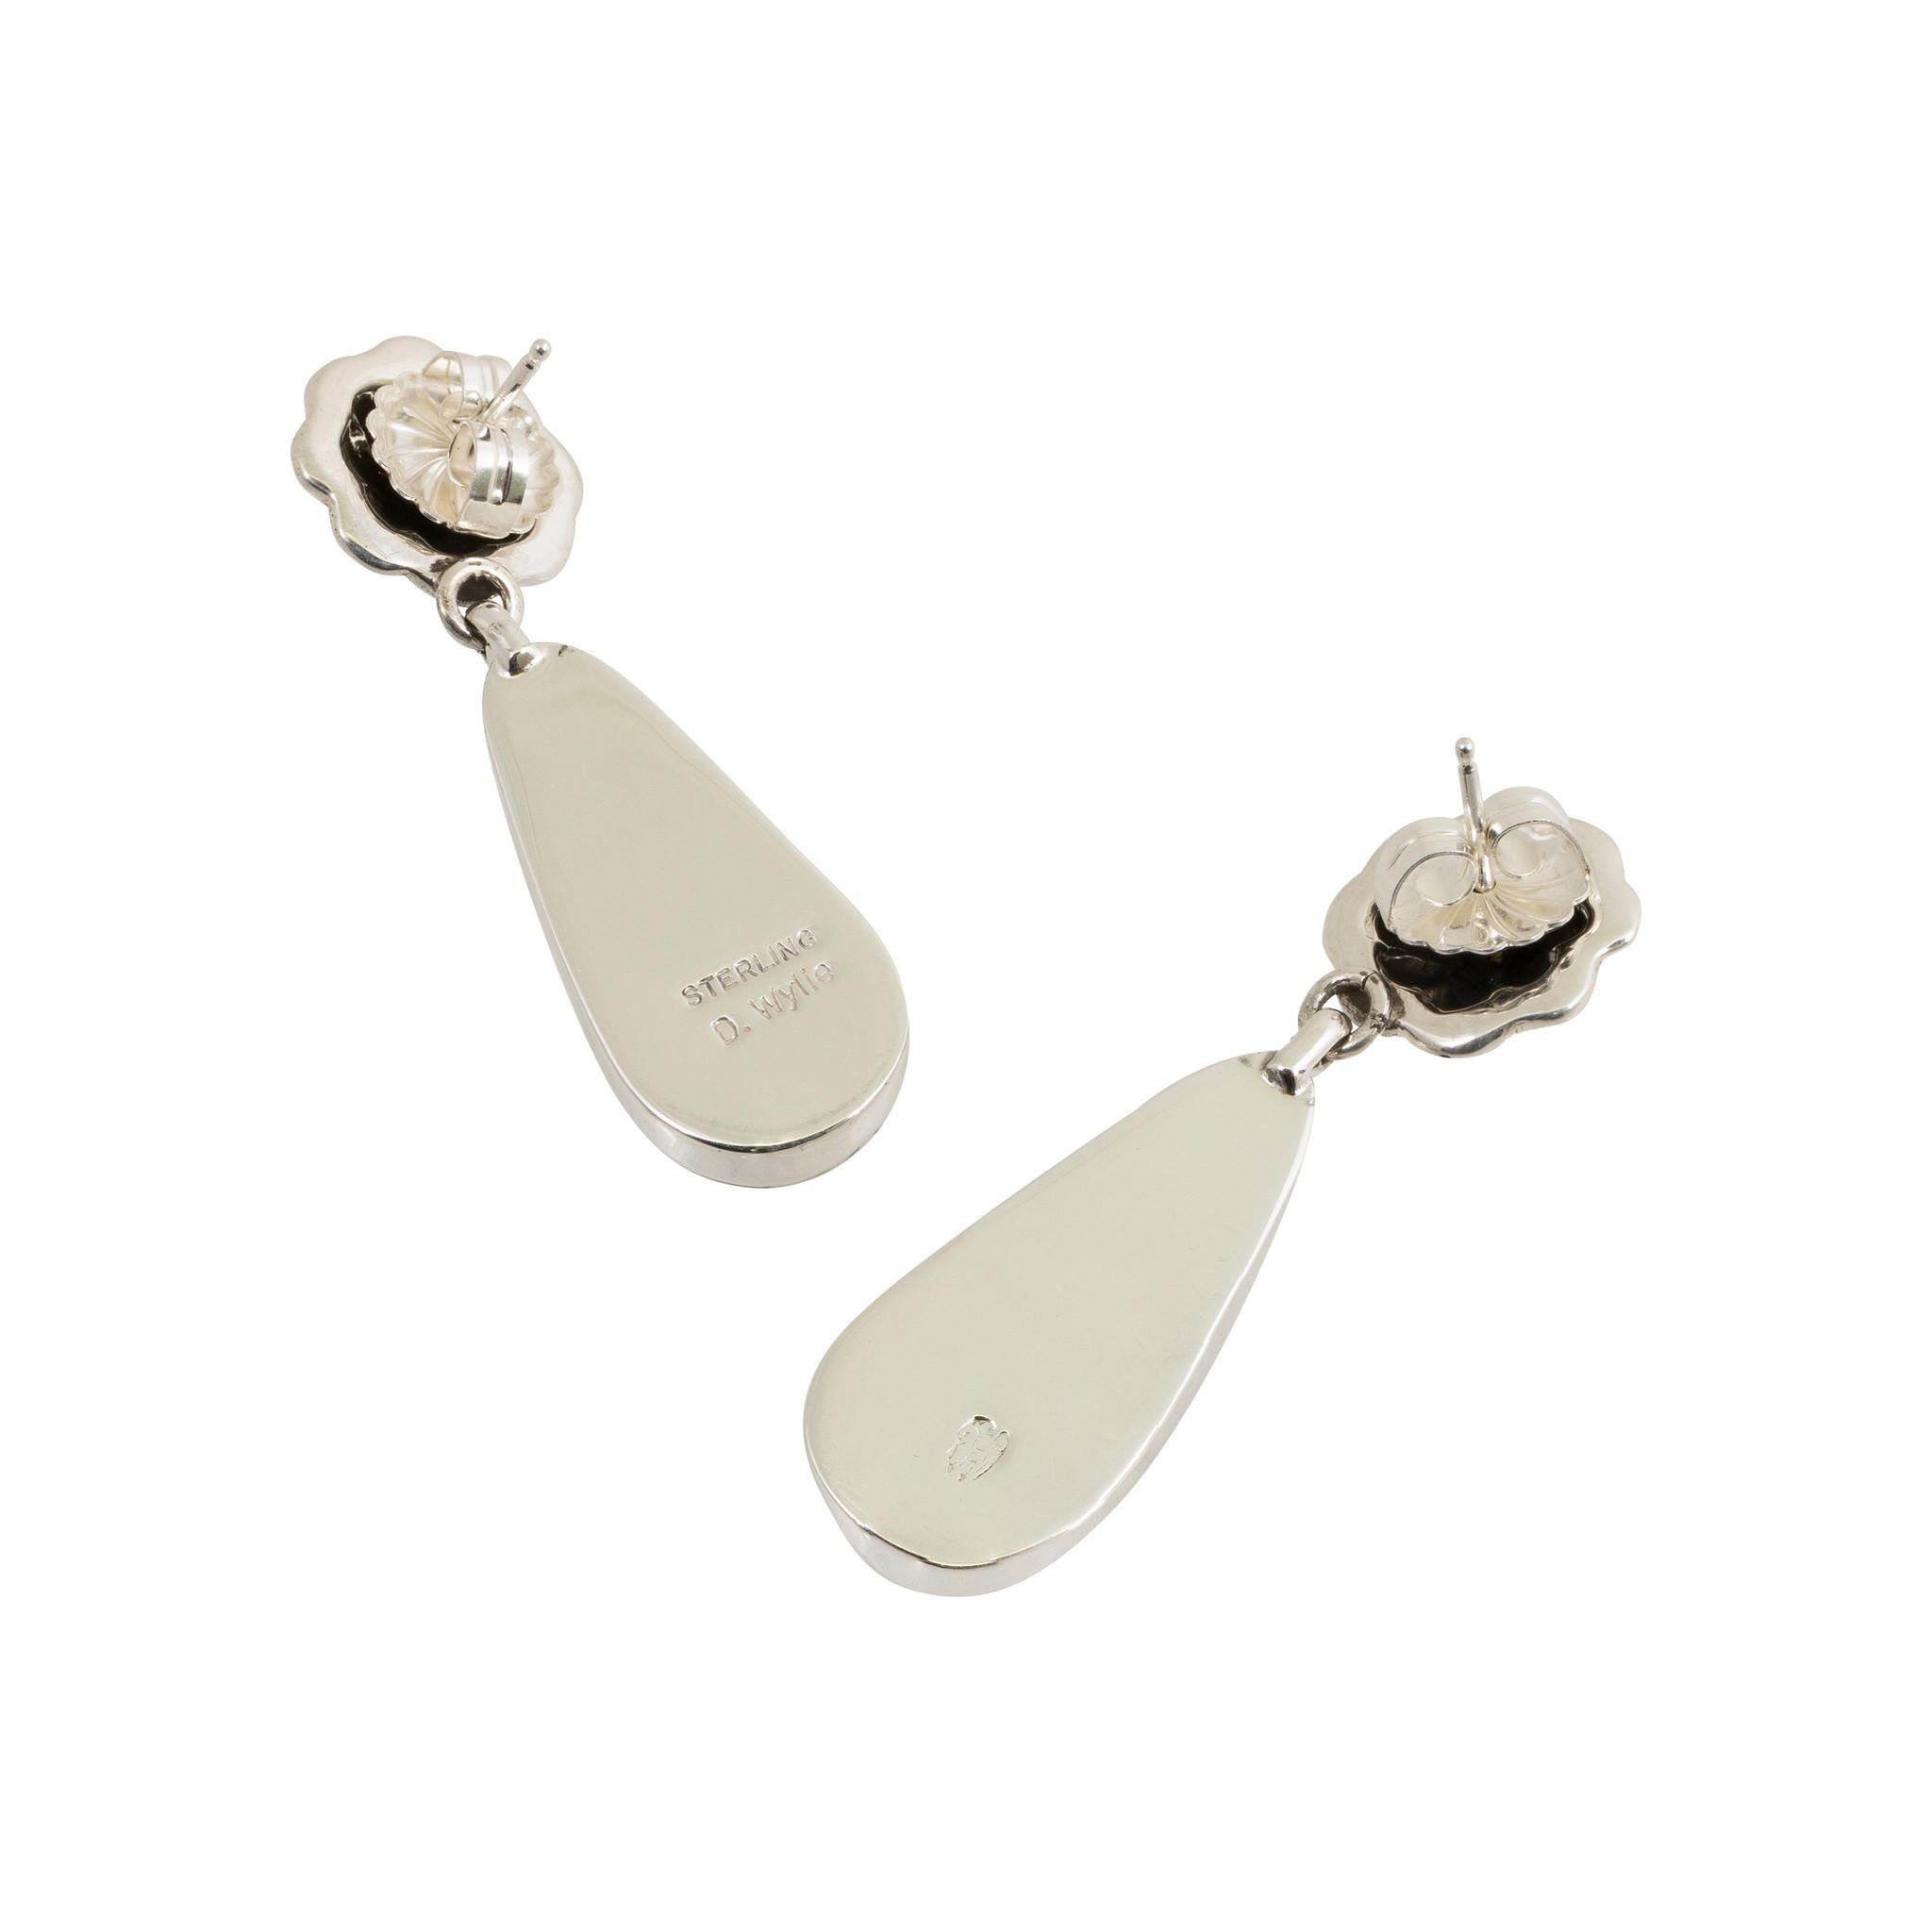 Navajo White buffalo turquoise earrings with hand stamped silver palmette posts and dangle drops of turquoise. Each earring with excellent white and black contrast.

PERIOD: Contemporary
ORIGIN: Navajo, Southwest
SIZE: 2